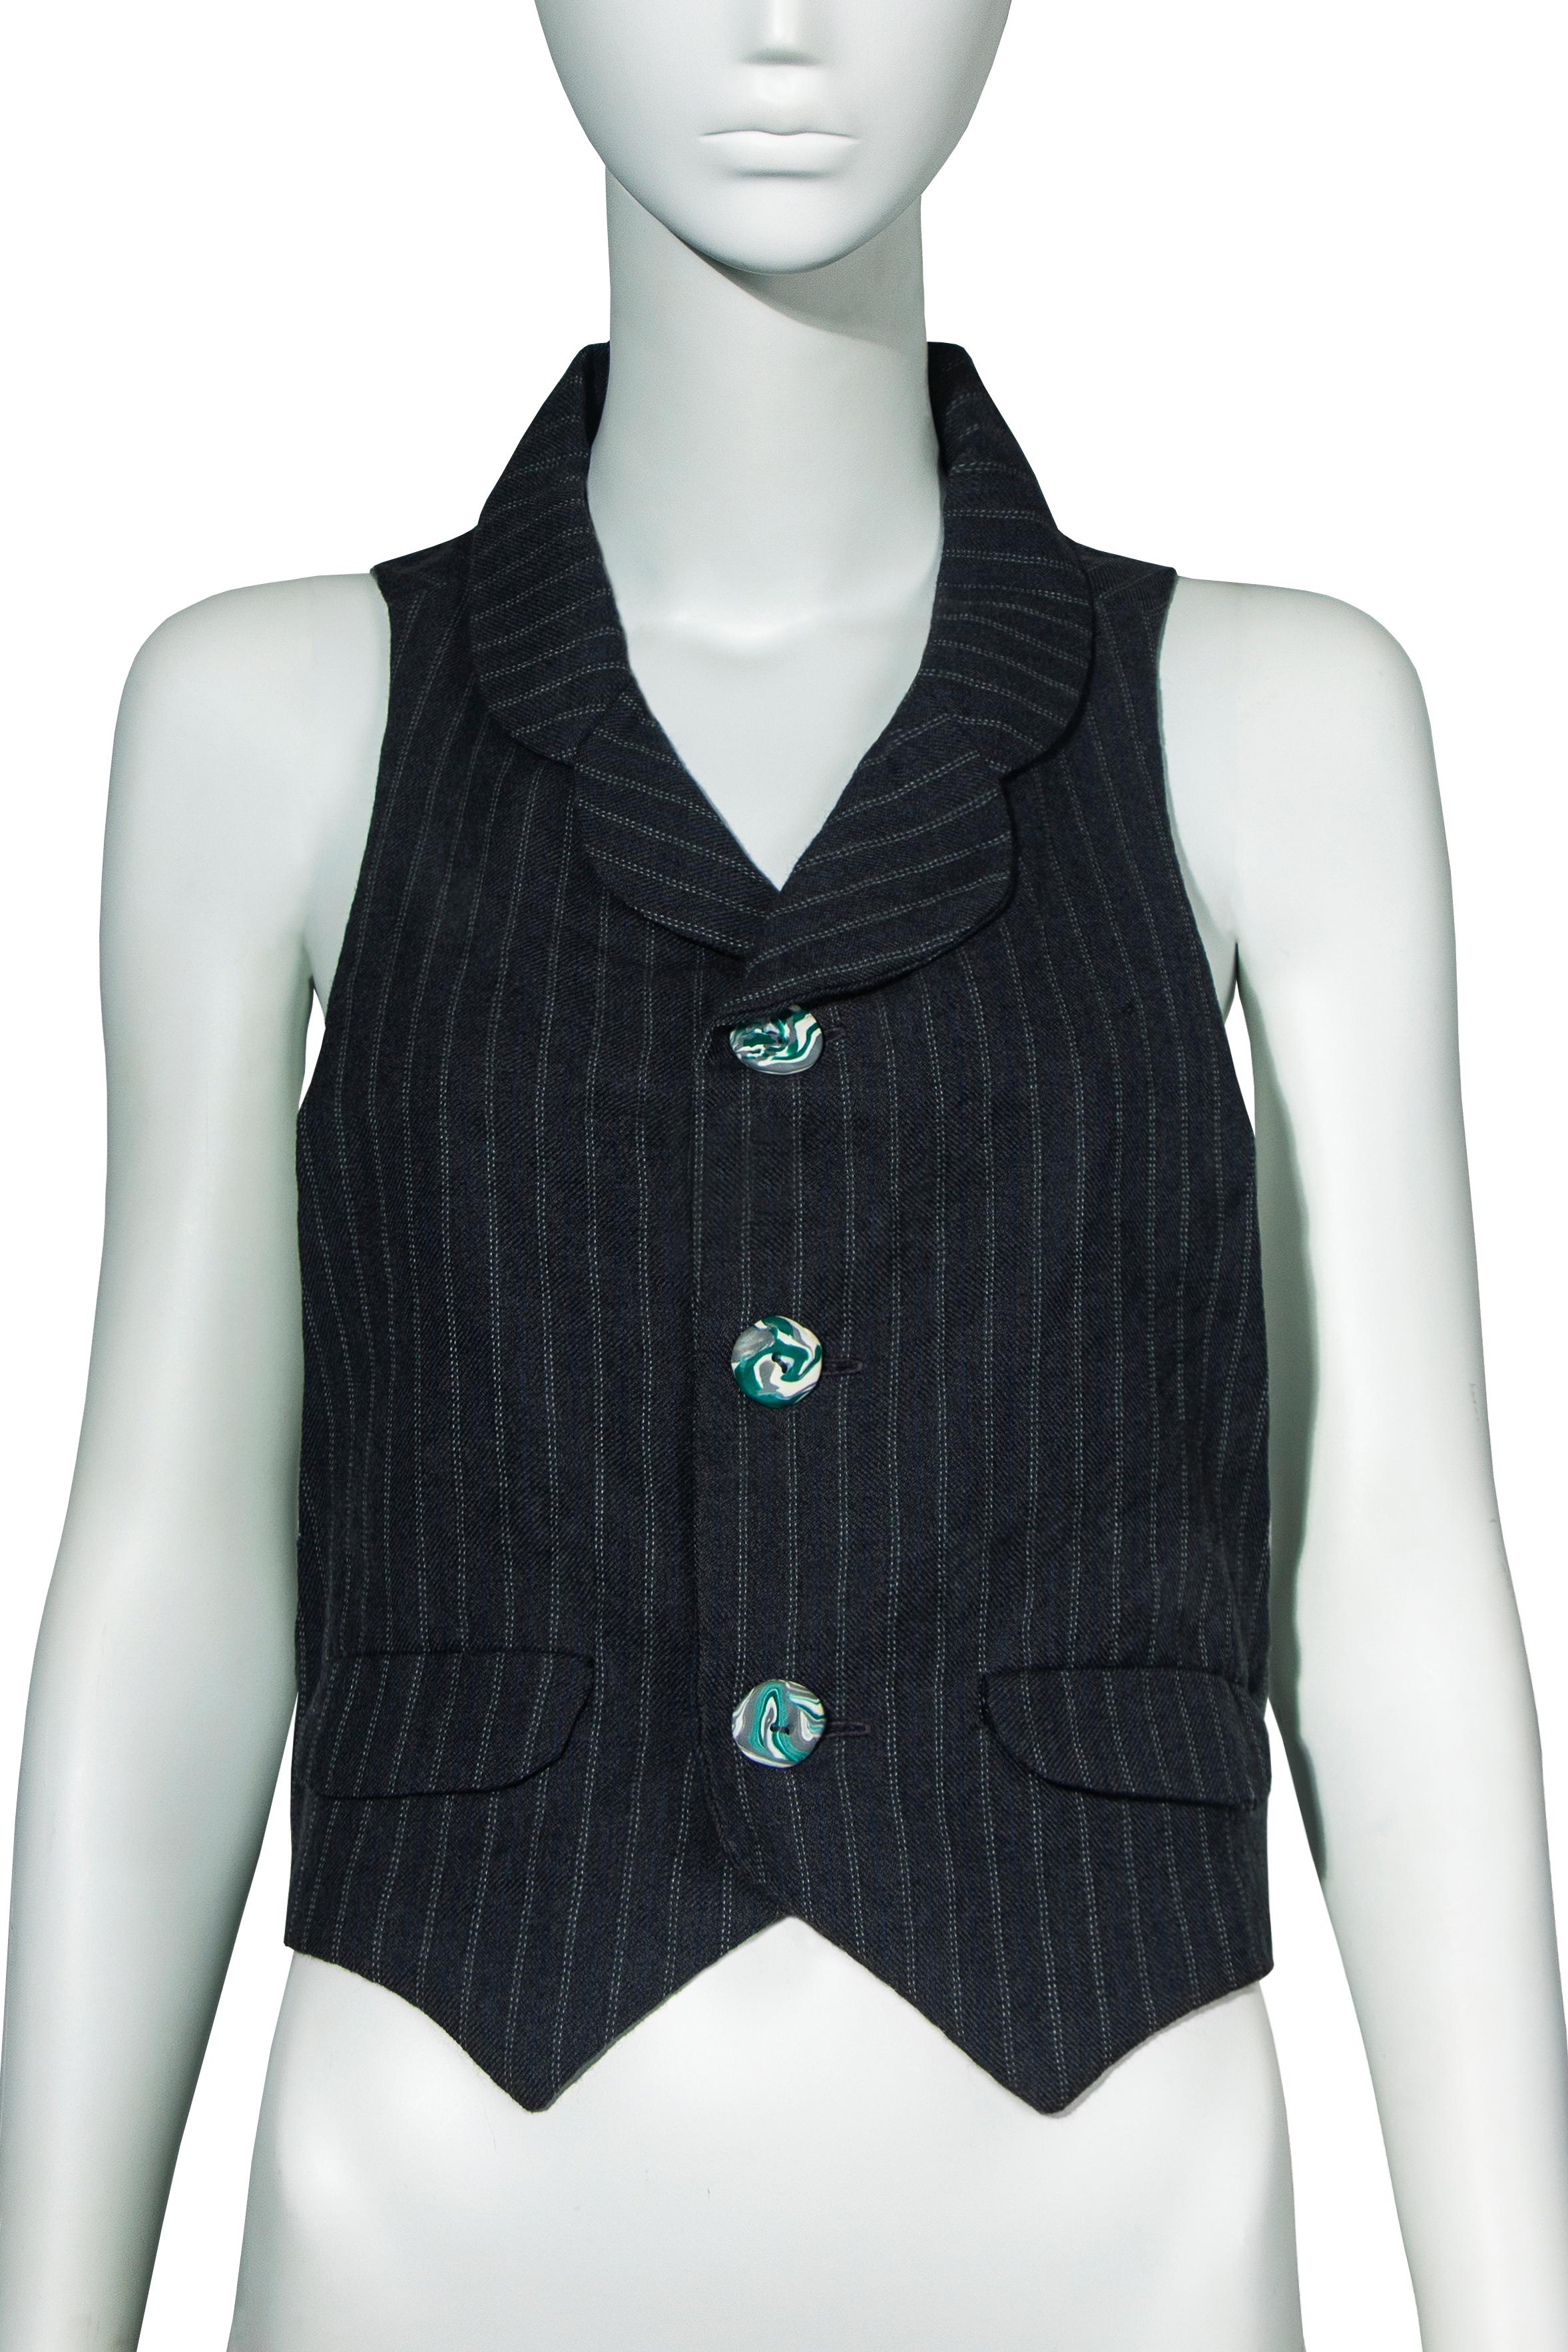 A John Galliano pinstripe vest, spring-summer 1986 'Fallen Angels'. This incredibly rare and early garment is from Galliano's second runway show—his fourth collection. Featuring a rounded collar and mini lapel, the standout feature of this vest is